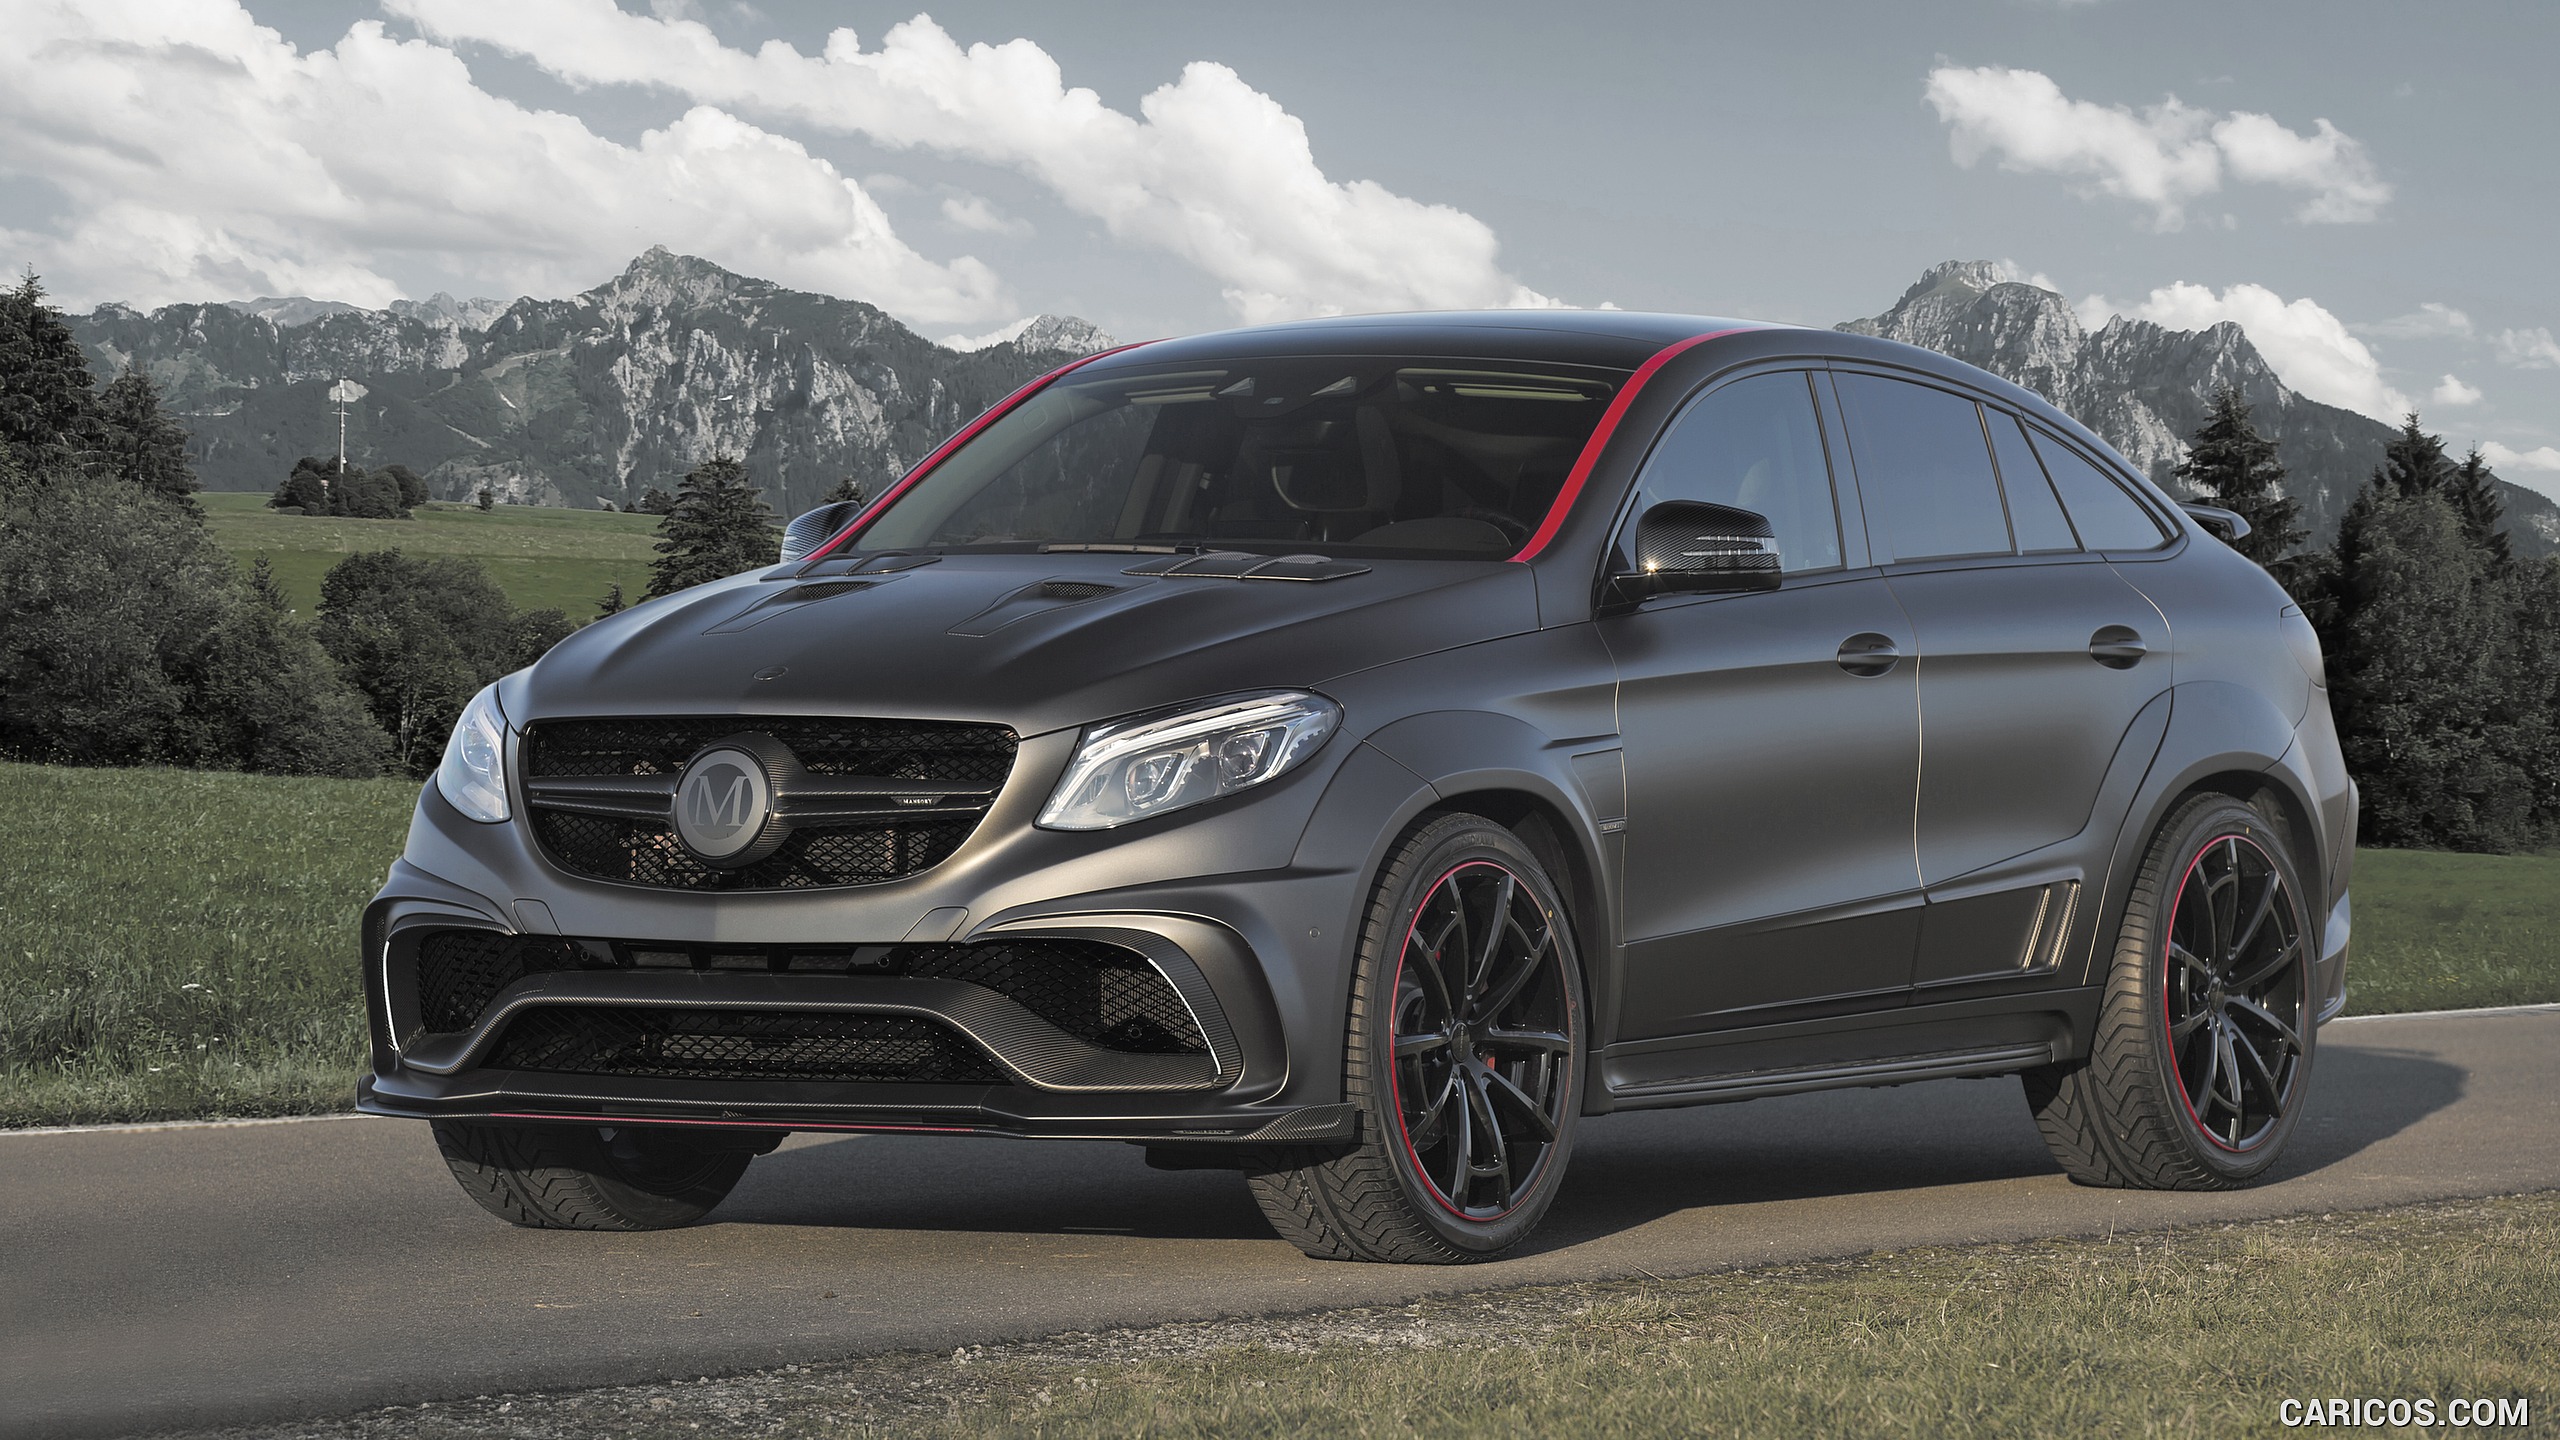 2016 MANSORY Mercedes-AMG GLE 63 Coupe - Front, #1 of 8